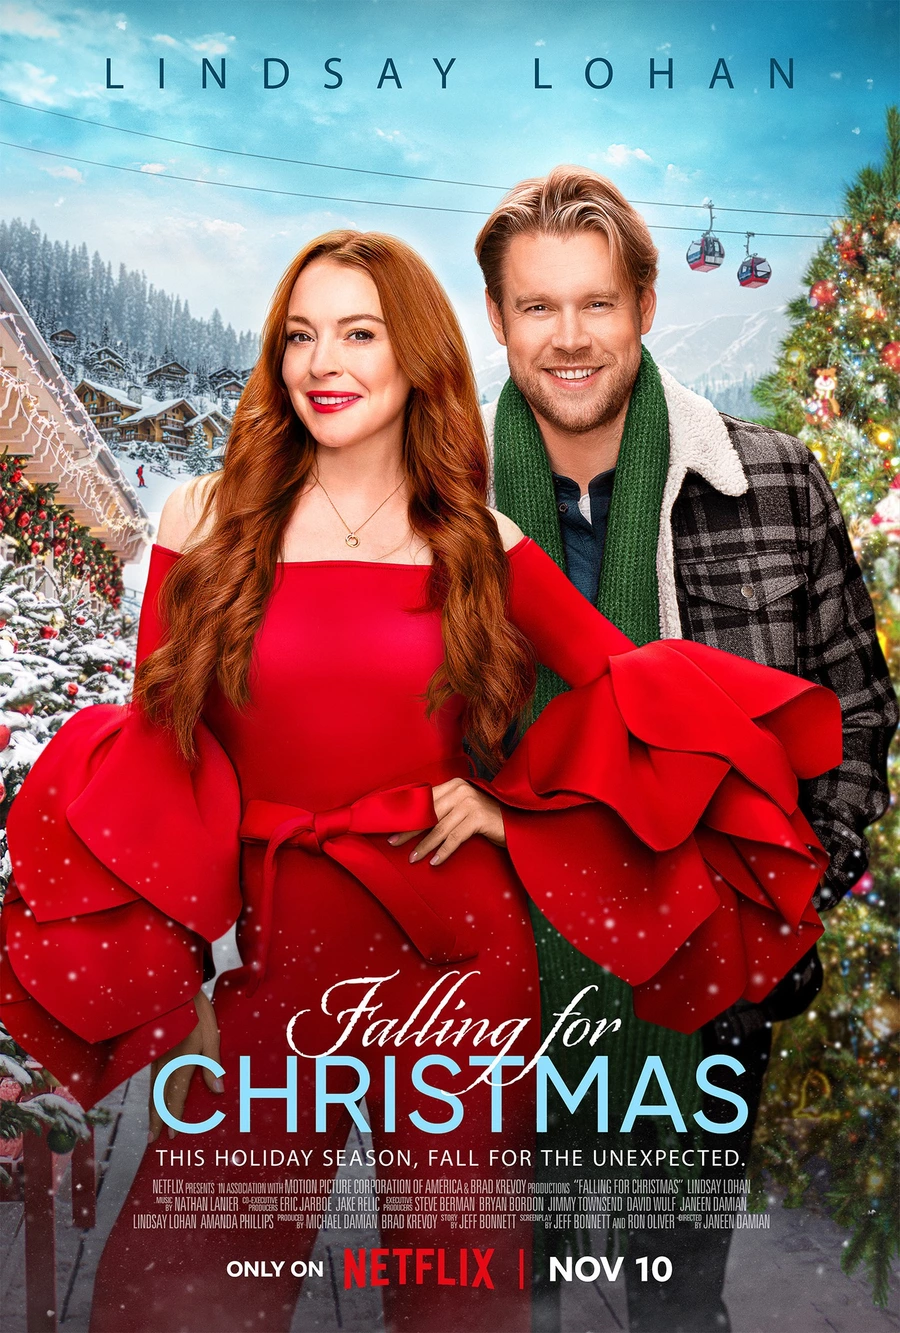 Today, Netflix premiered the holiday romantic comedy «Falling for Christmas», starring Lindsay Lohan.. In the center of the plot is a spoiled heiress who, having lost her memory due to an accident at a ski resort, finds herself at Christmas in the cozy house of a widower and his daughter.